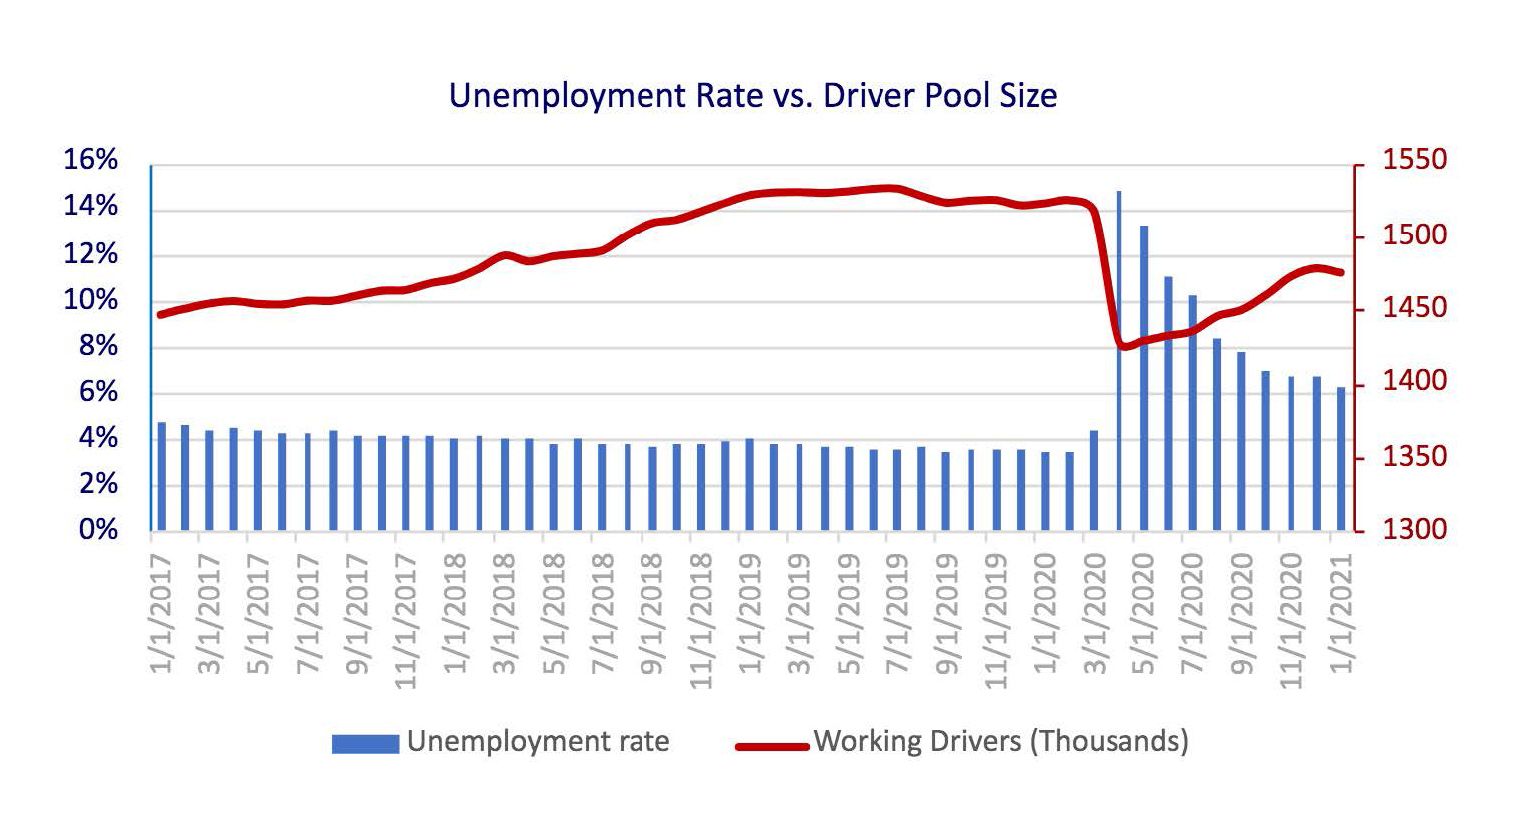 Unemployment Rate vs Driver Pool Size